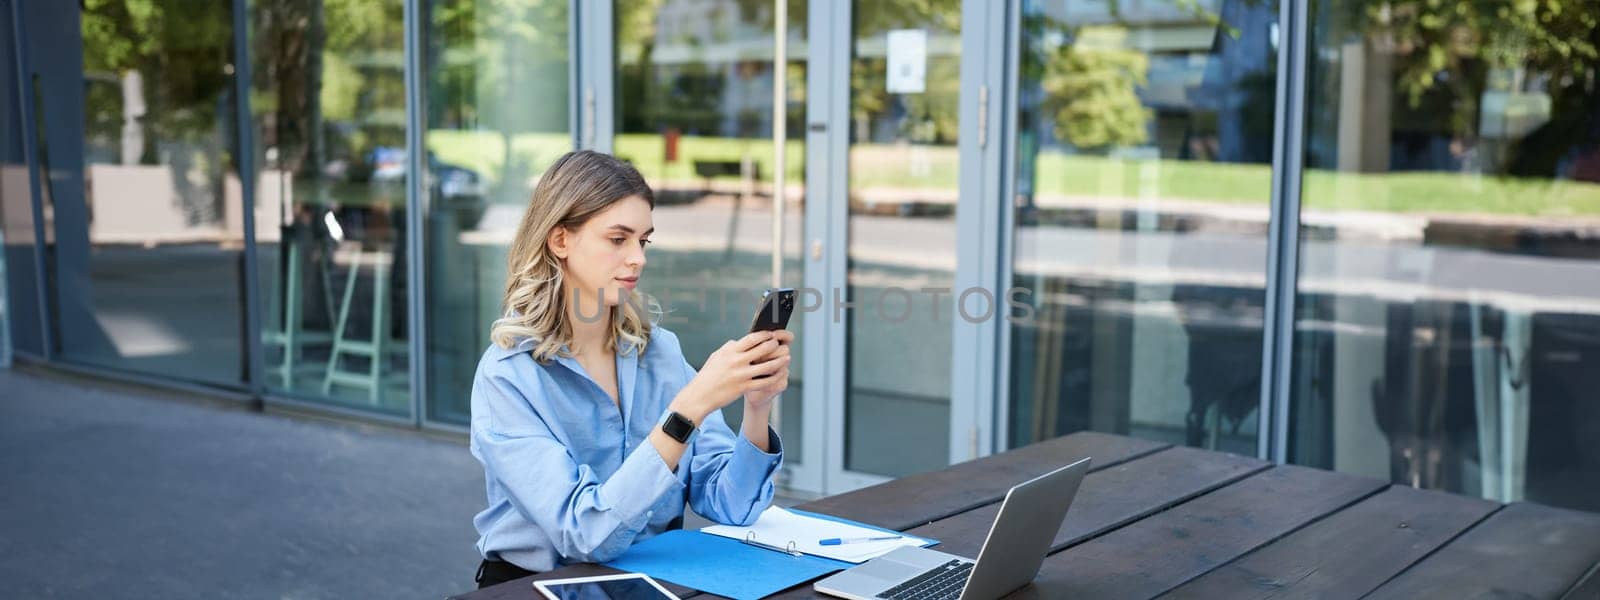 Portrait of businesswoman sitting outdoors and working. Young corporate woman looking at her smartphone, sitting outside with laptop and digital tablet.